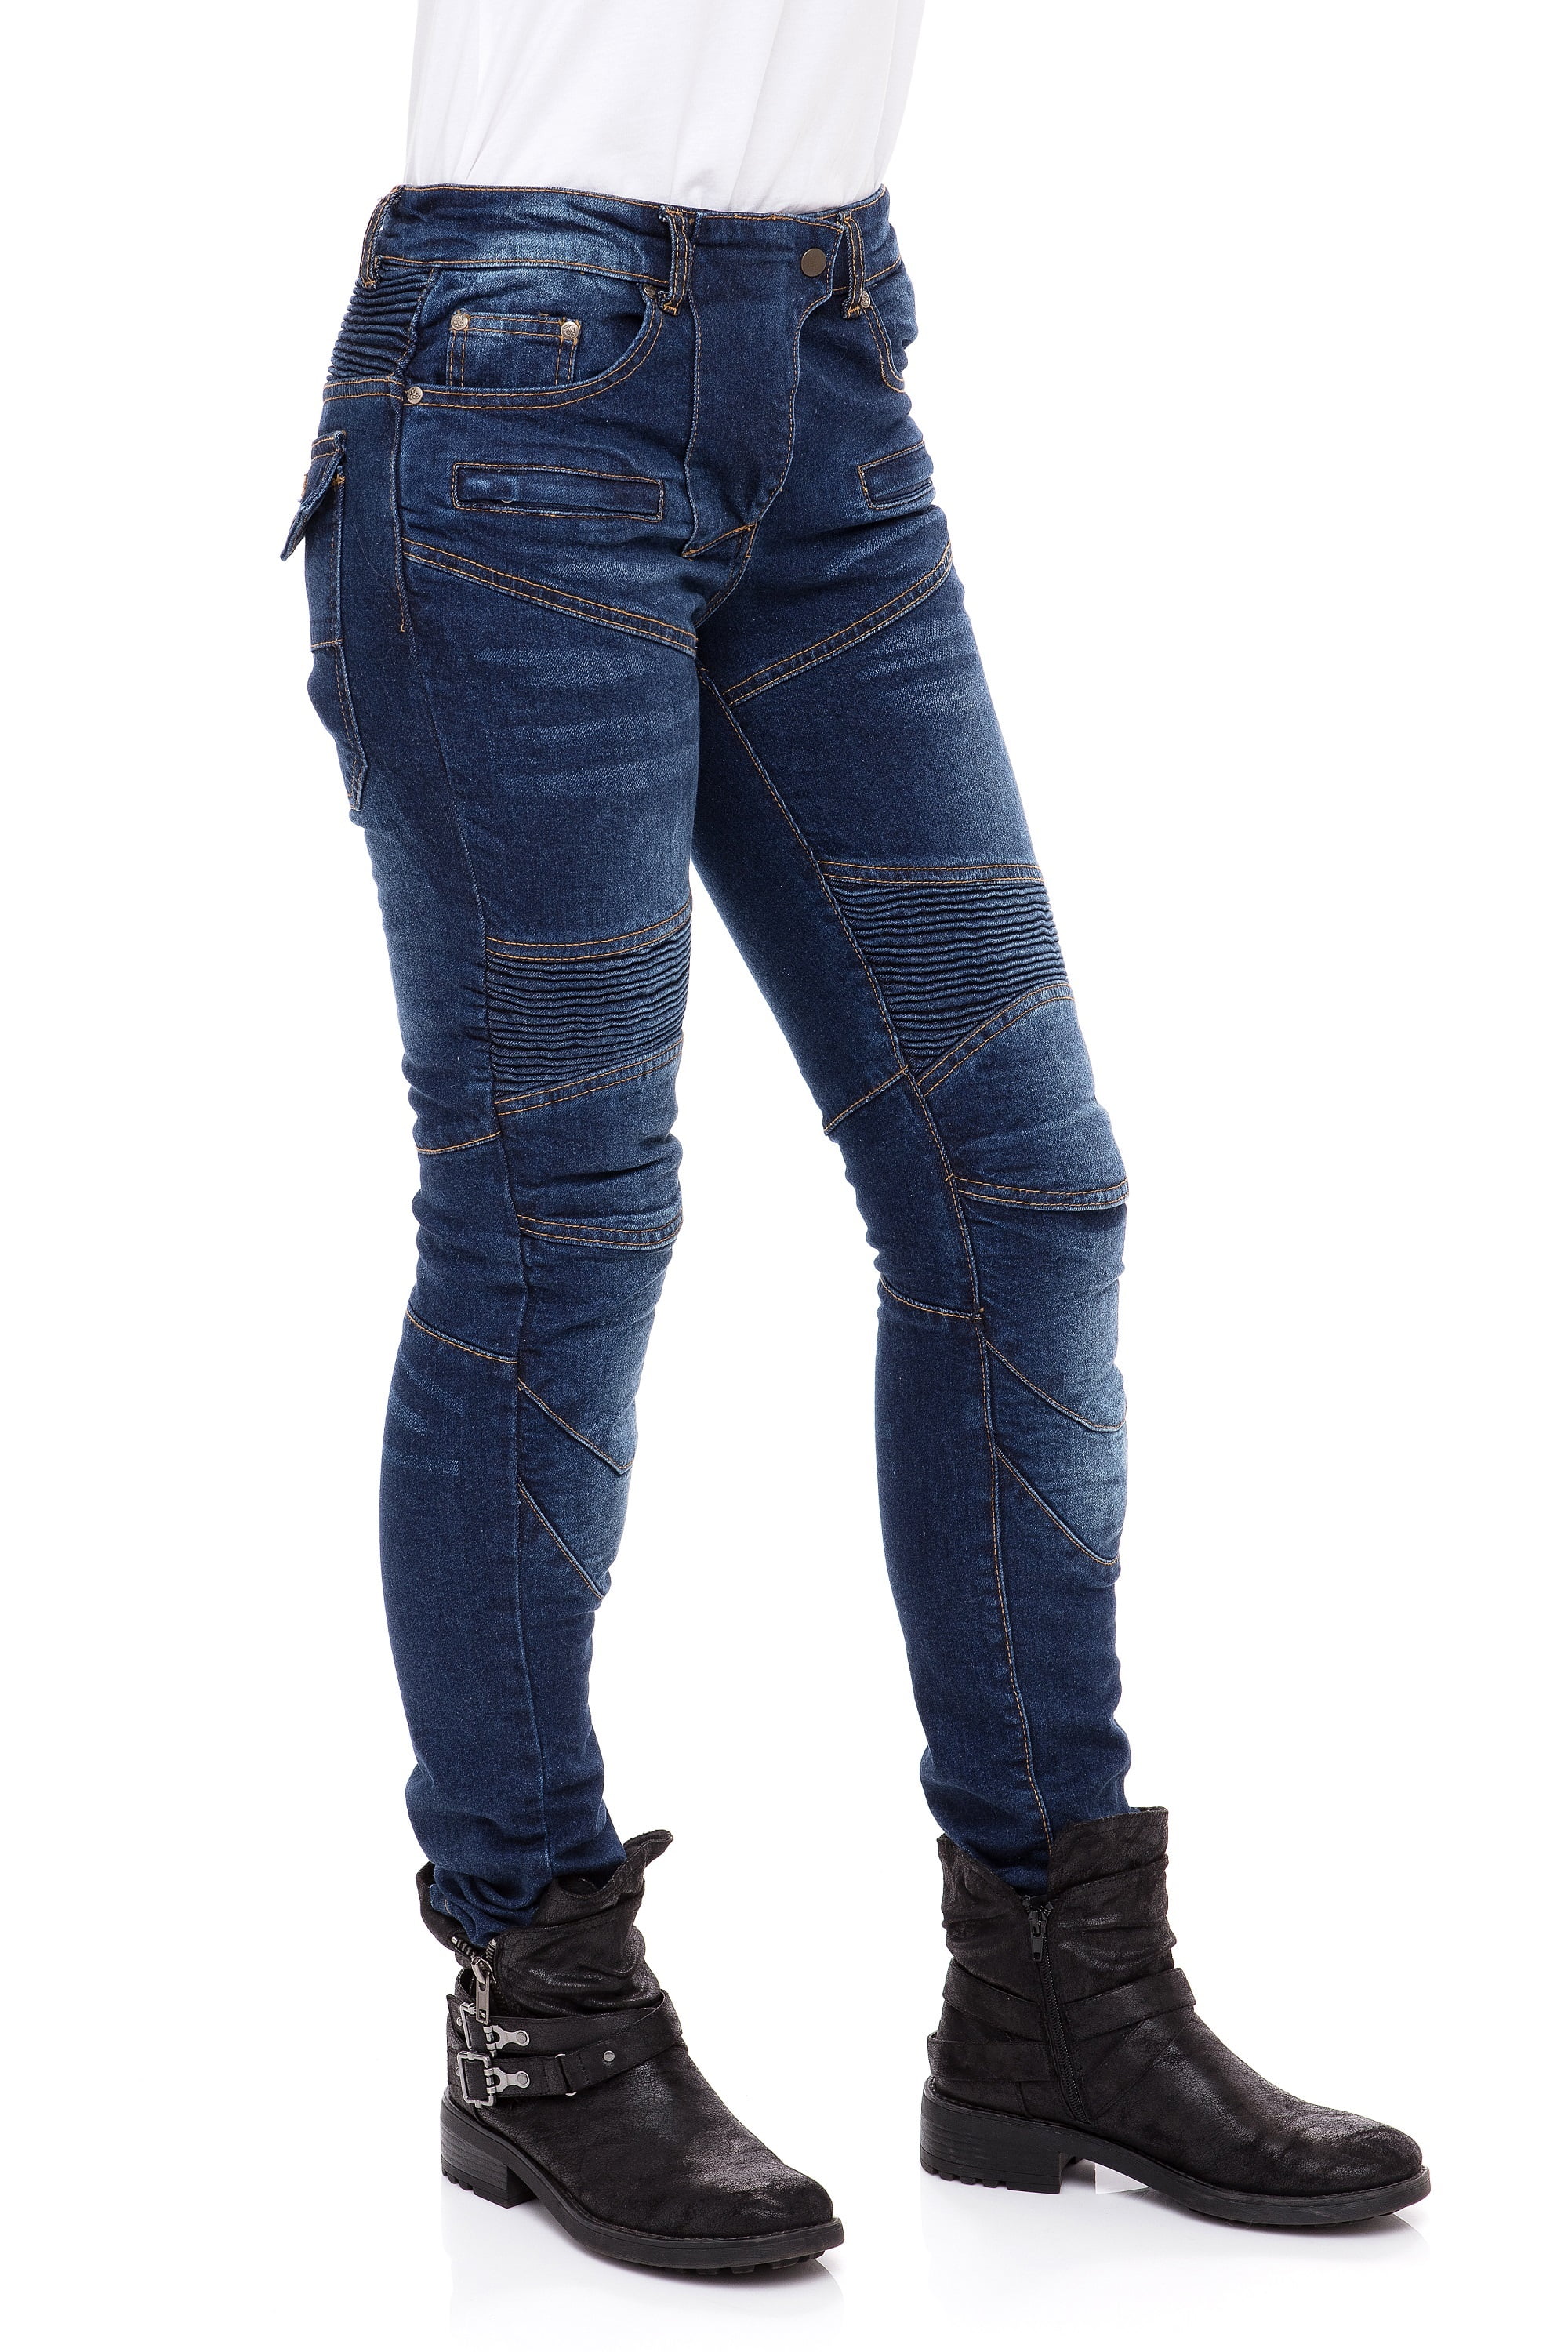 Ladies Jeans Motorcycle Protective Lined With Kevlar® Armours Quality Blue GREAT BIKERS GEAR